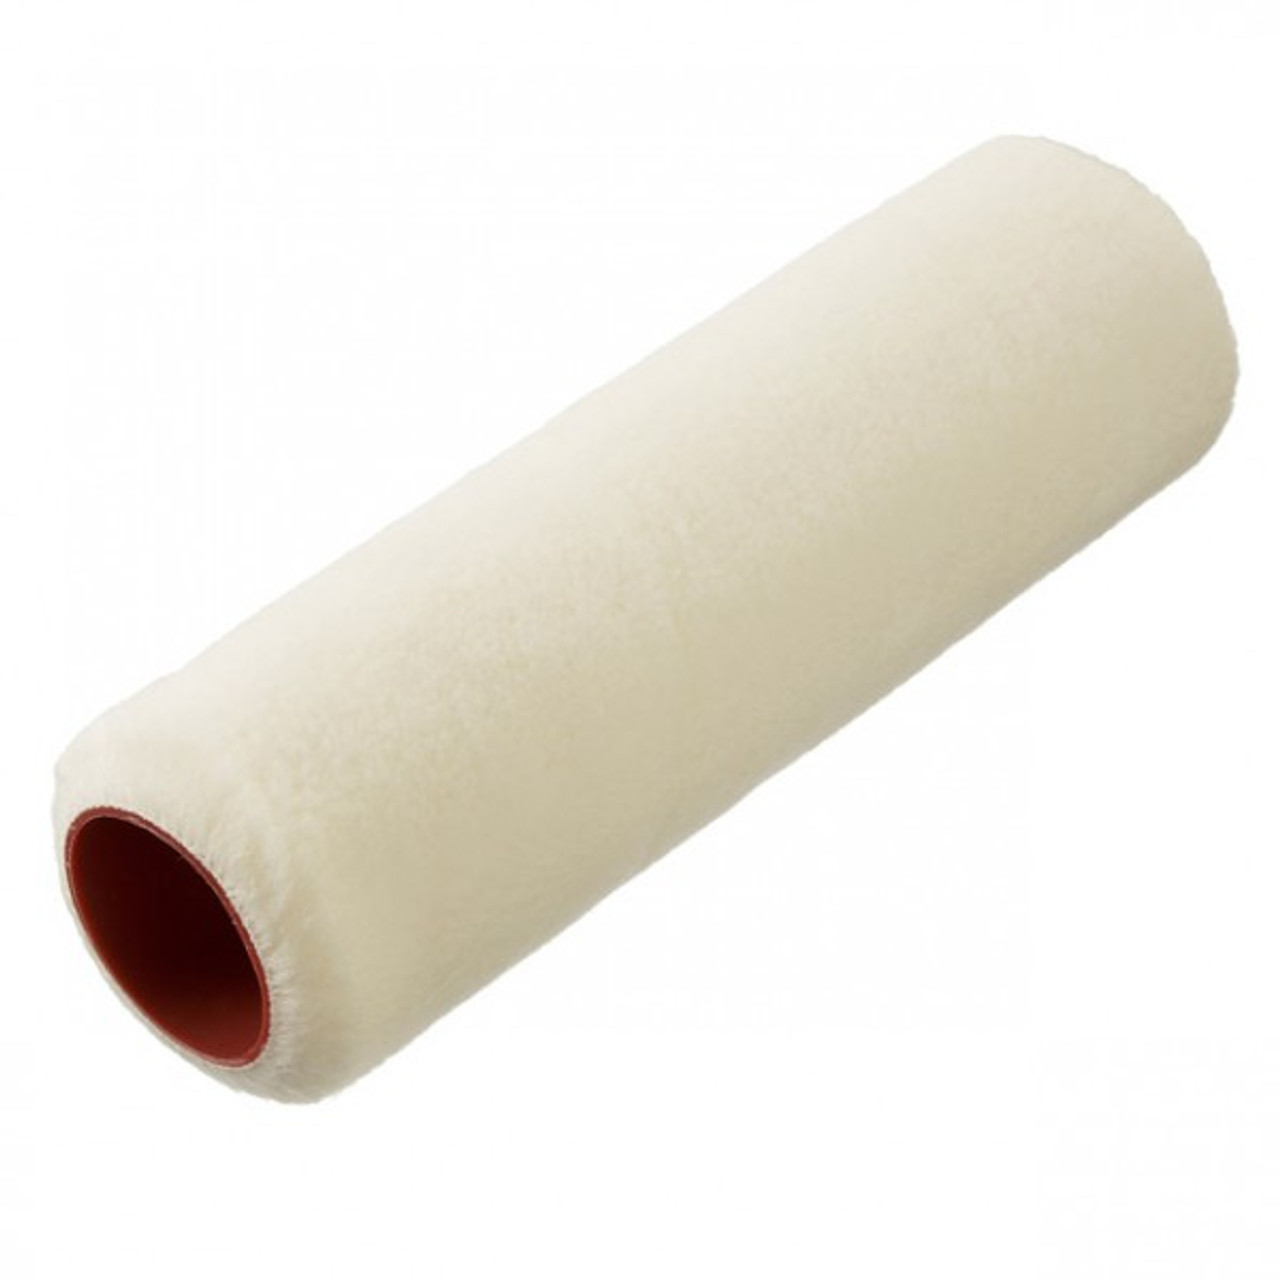 IMPA 510342 SPARE PAINT ROLLER REPLACEMENT 300mm